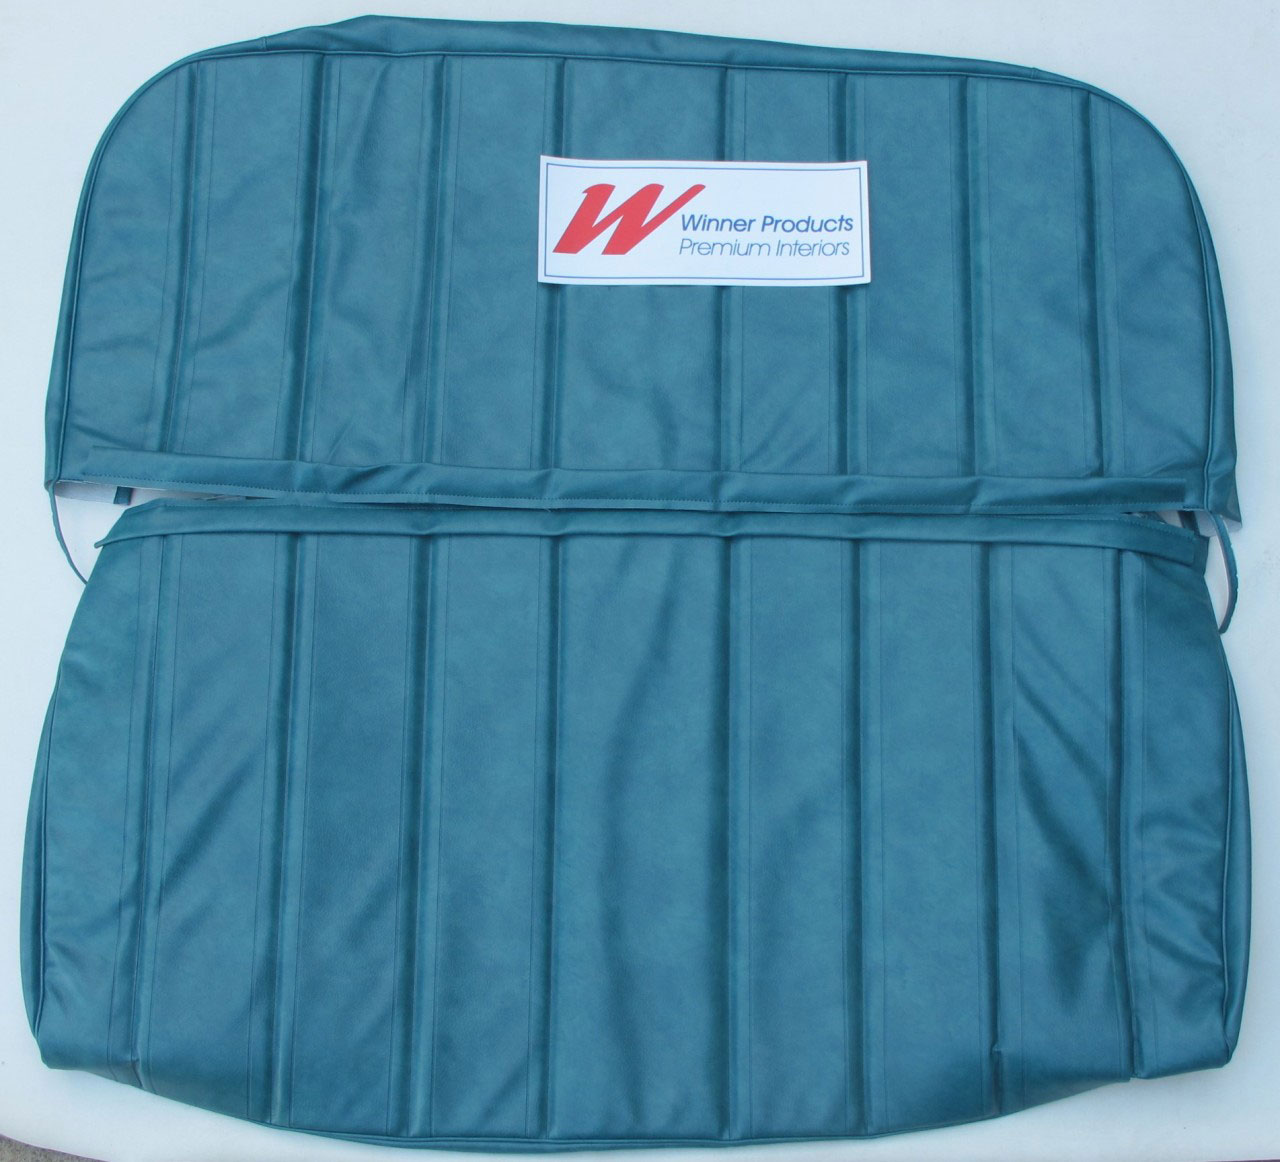 Holden Kingswood HG Kingswood Wagon 13E Turquoise Mist Seat Covers (Image 2 of 4)